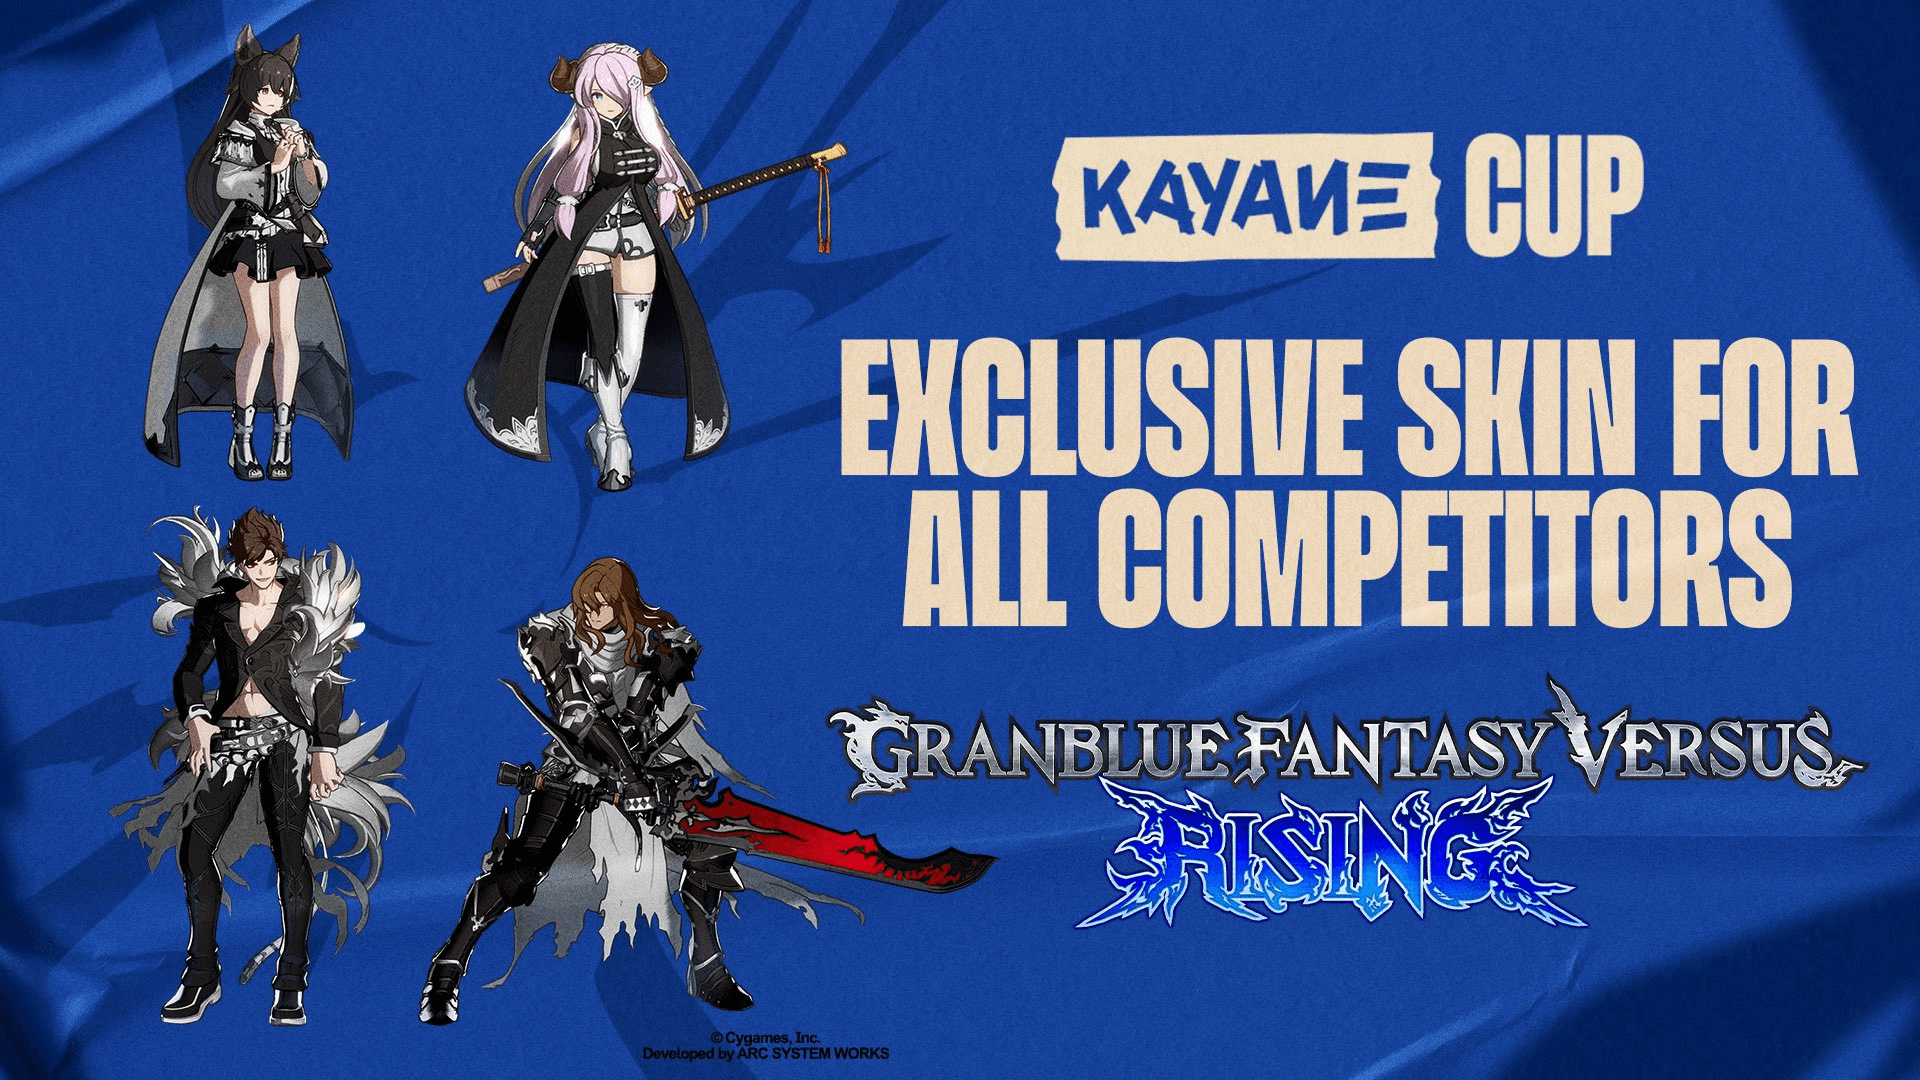 Kayane Cup Participants To Receive Free GBFVR Skin